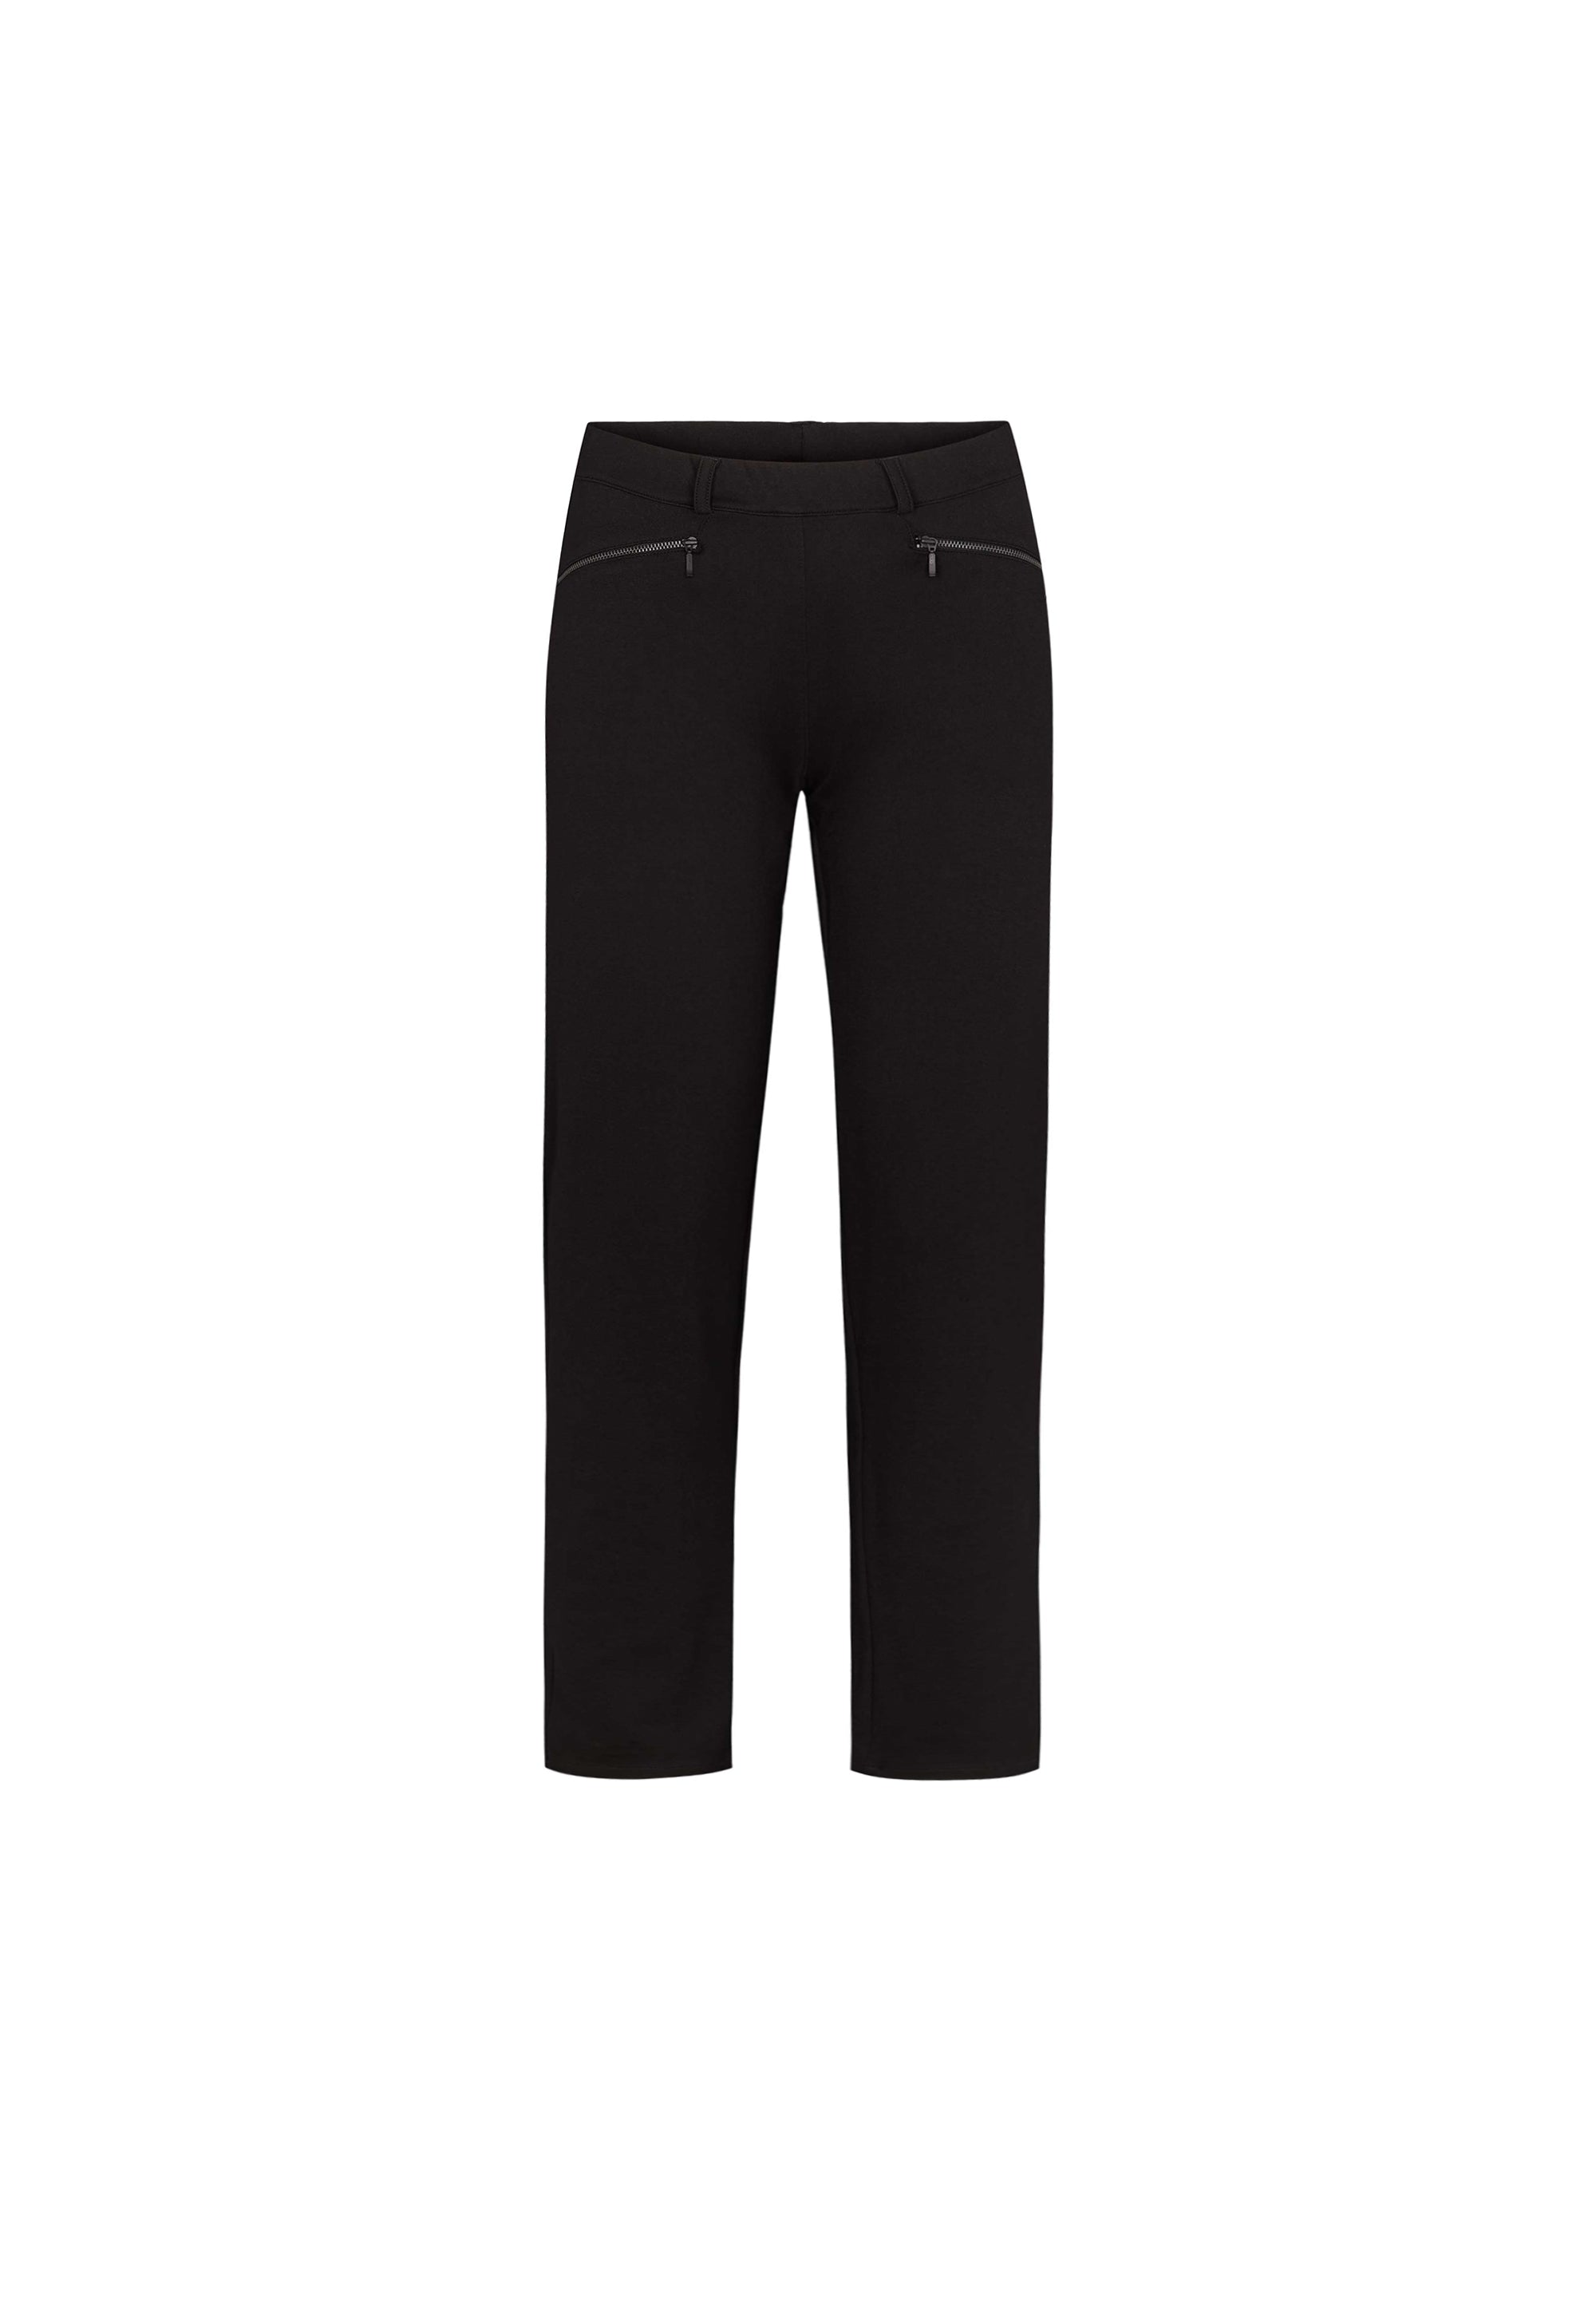 LAURIE Ruby Straight - Short Length Trousers STRAIGHT 99143 Black brushed